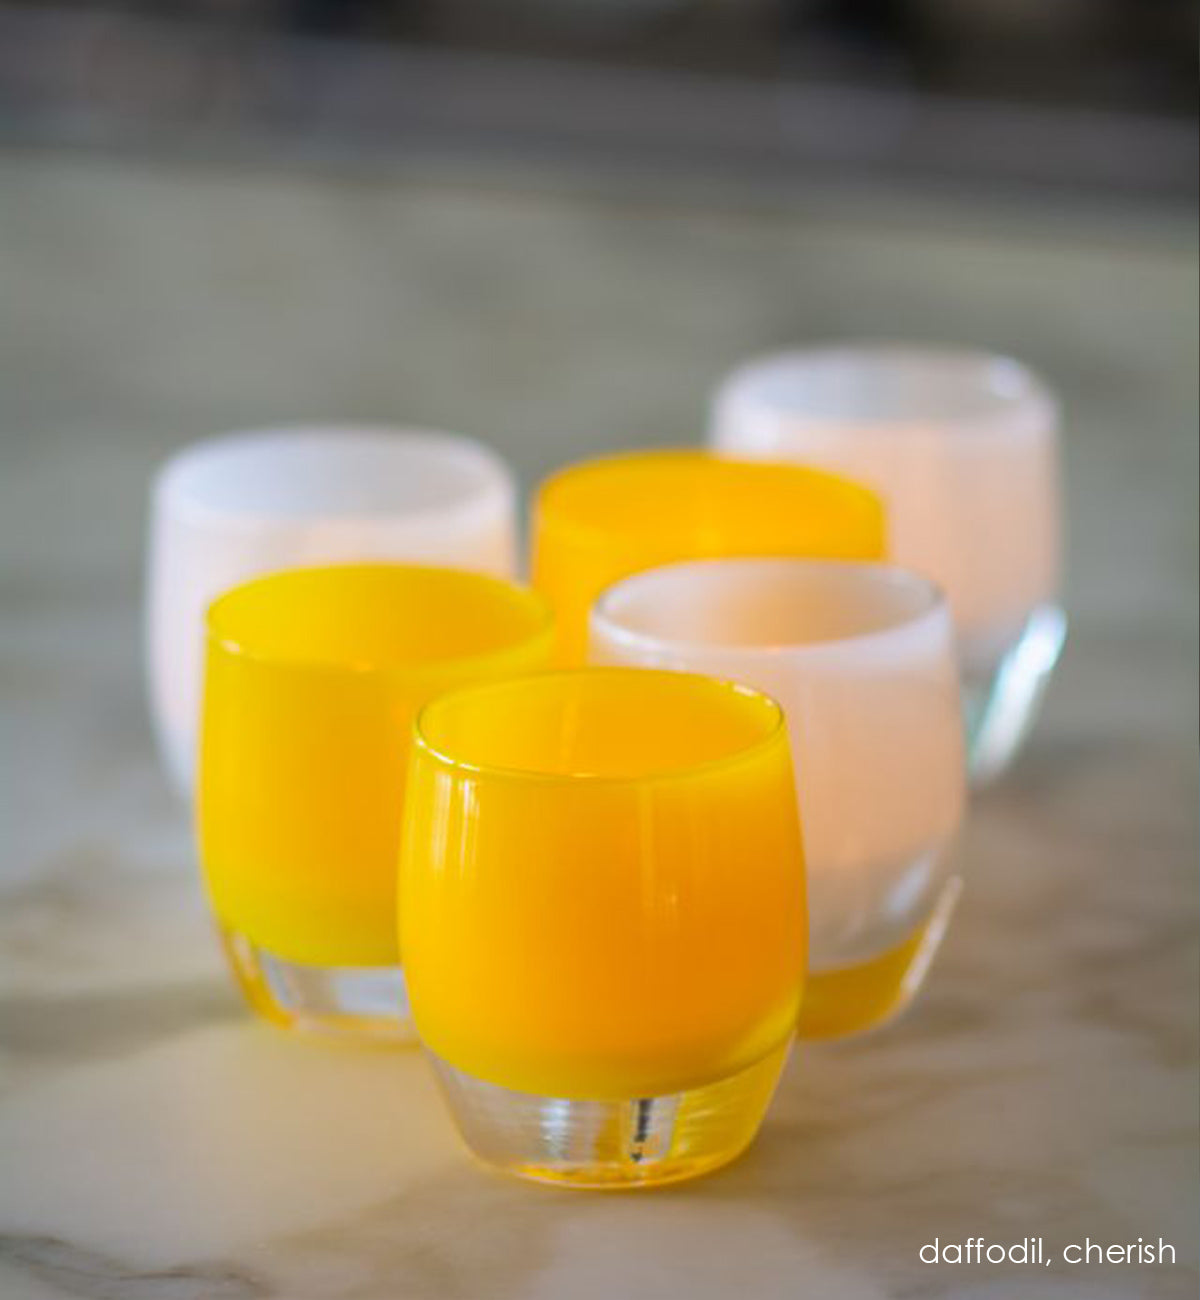 three daffodil opaque yellow hand-blown glass votive candle holders on a marble countertop with three chrerish.